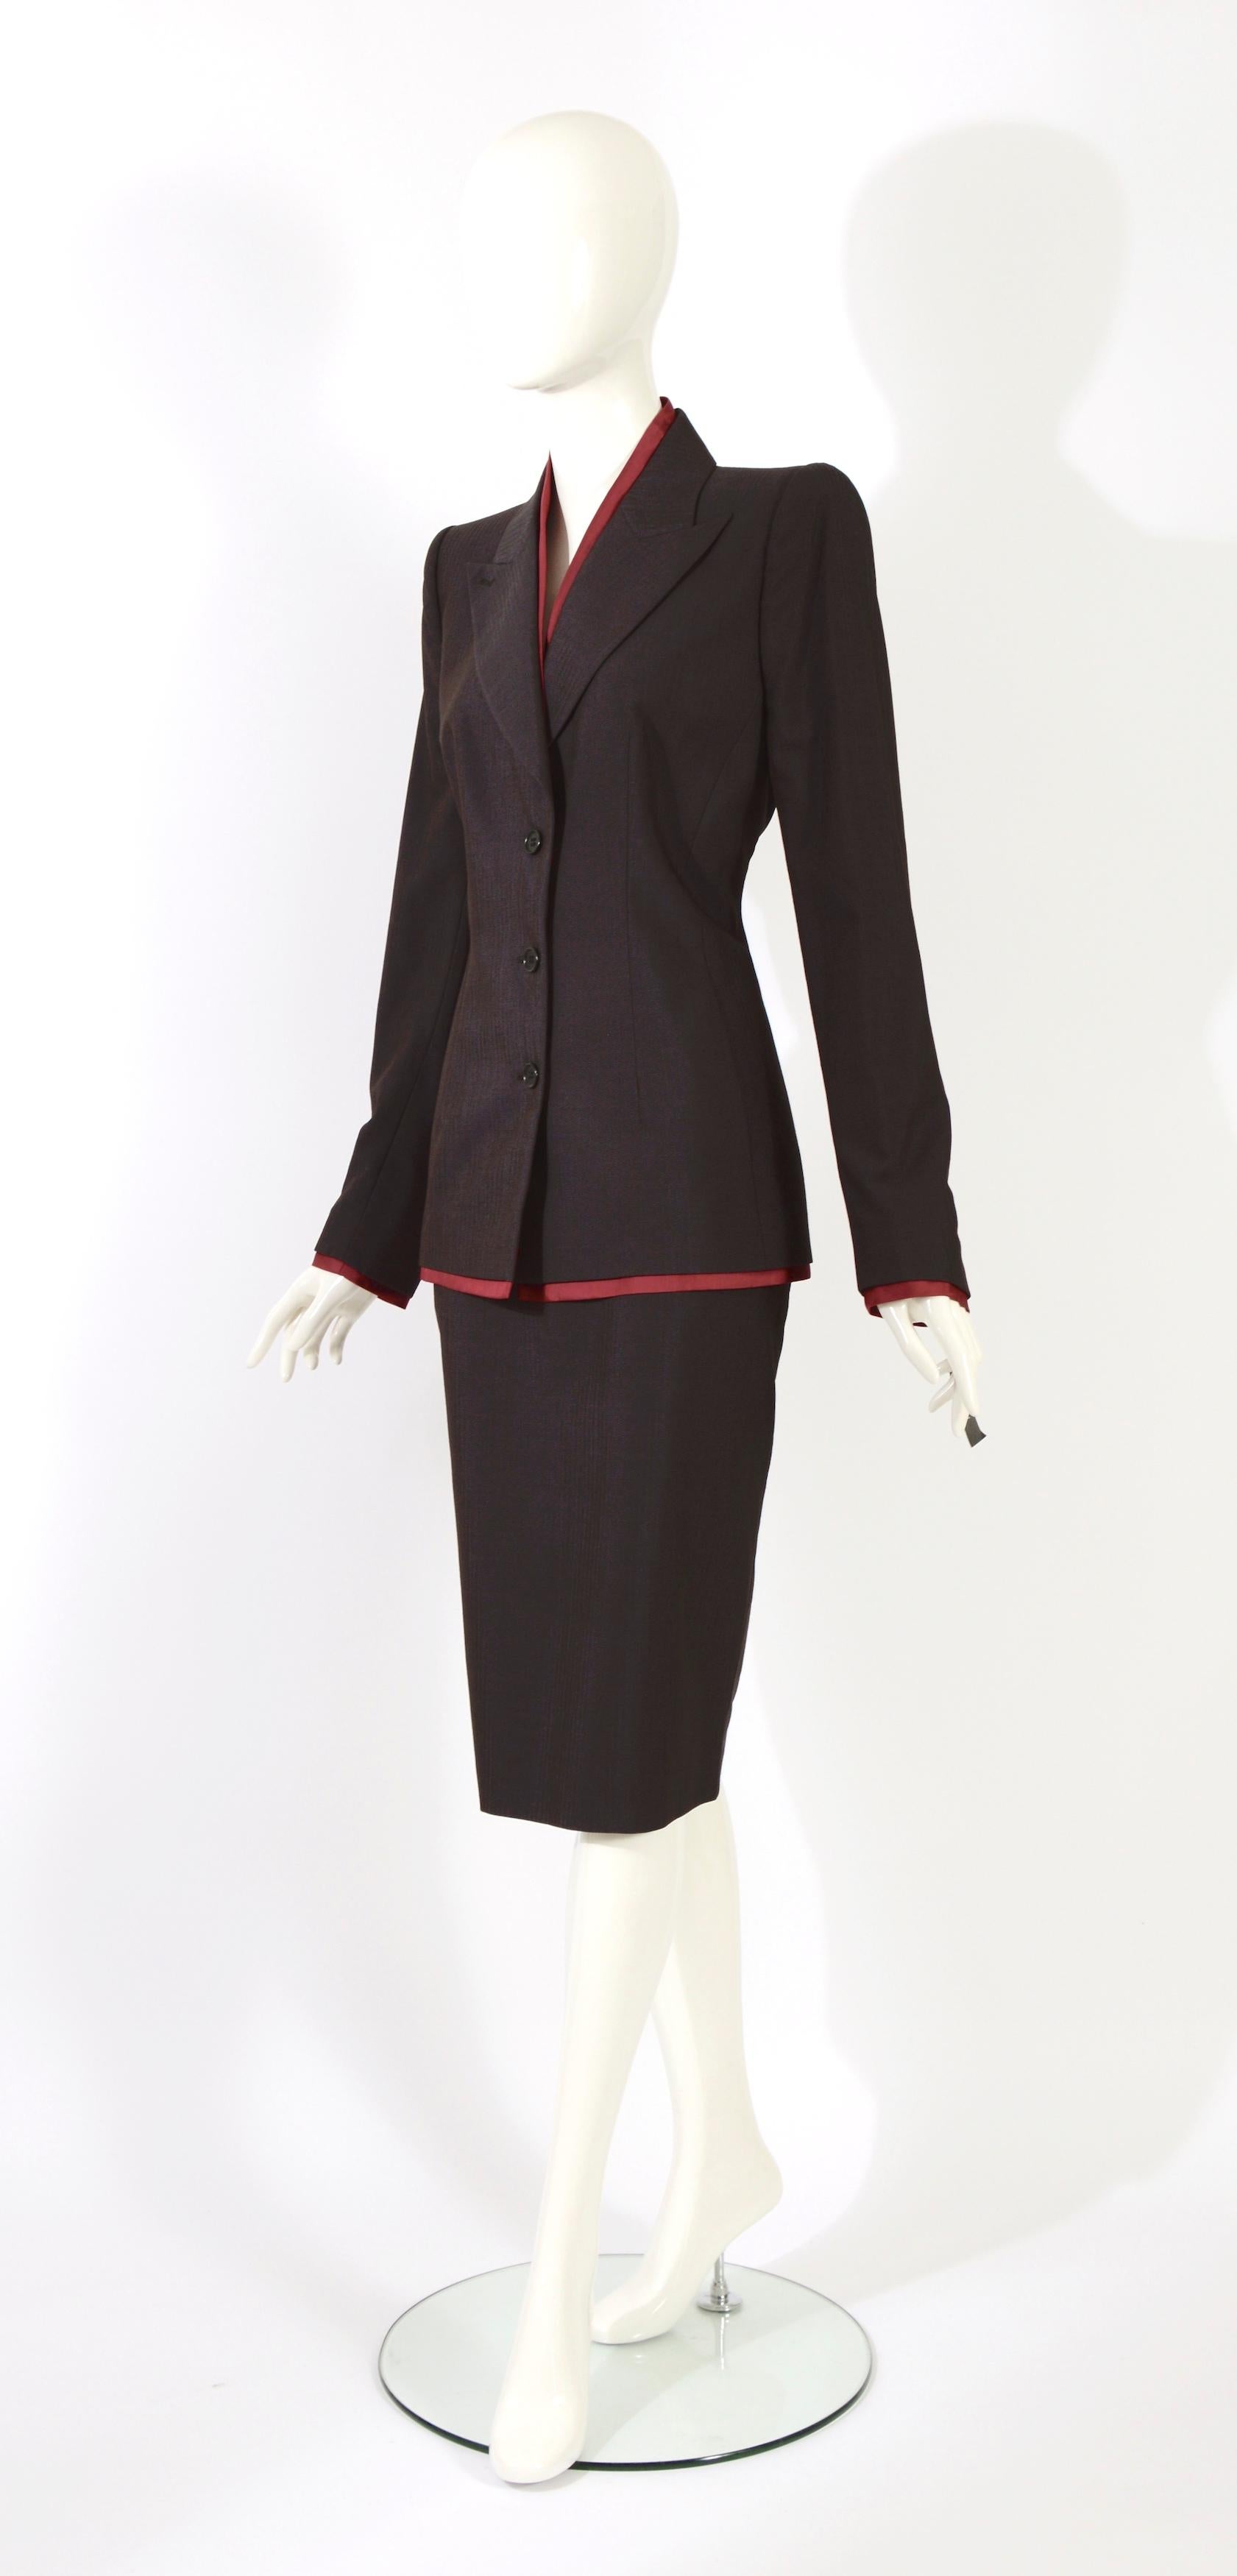 Important collectible Alexander McQueen Fall Winter 1997 'It's a Jungle Out There' collection pinstripe jacket and skirt suit. 
Runway look, the jacket has shoulder pads. 
The condition is unworn with tags still attached. 
Made in Italy 
Jacket and